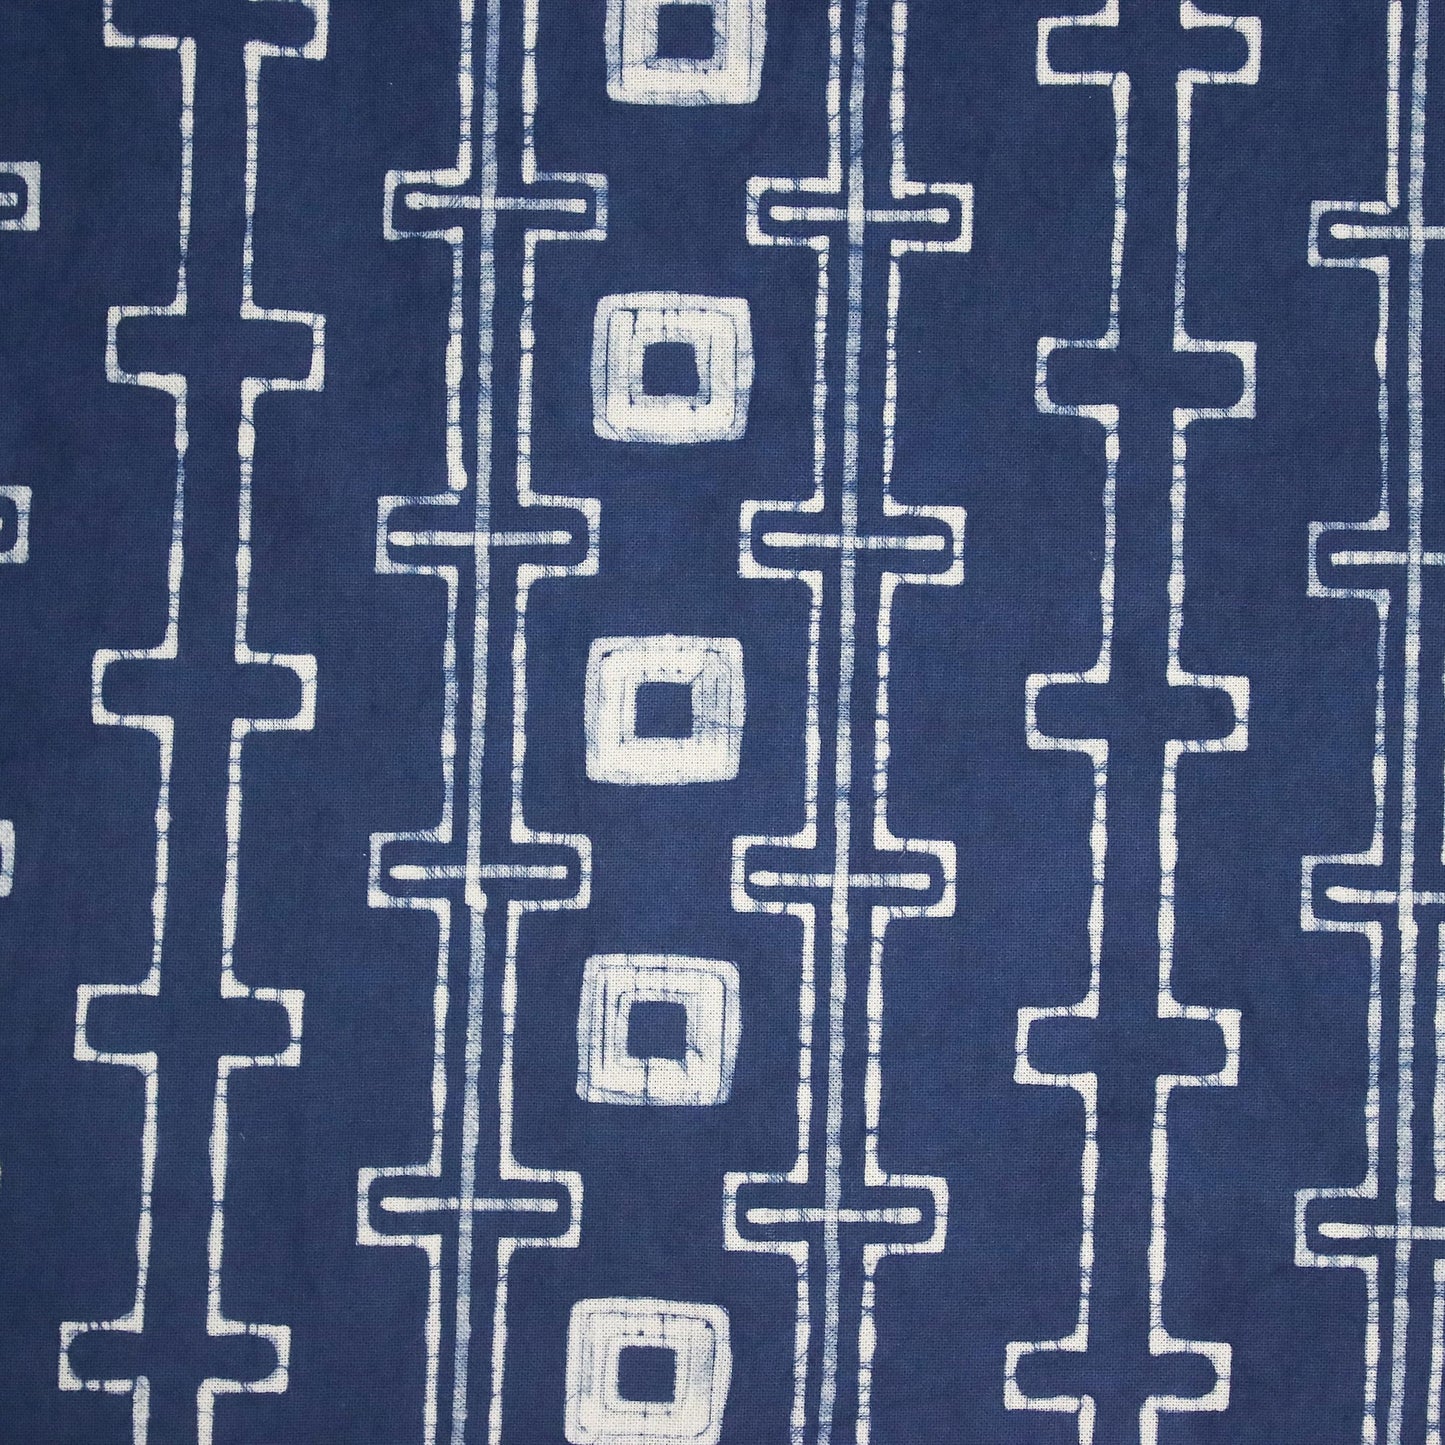 Continuous Chain Handcrafted Indigo and White Cotton Batik Table Runner